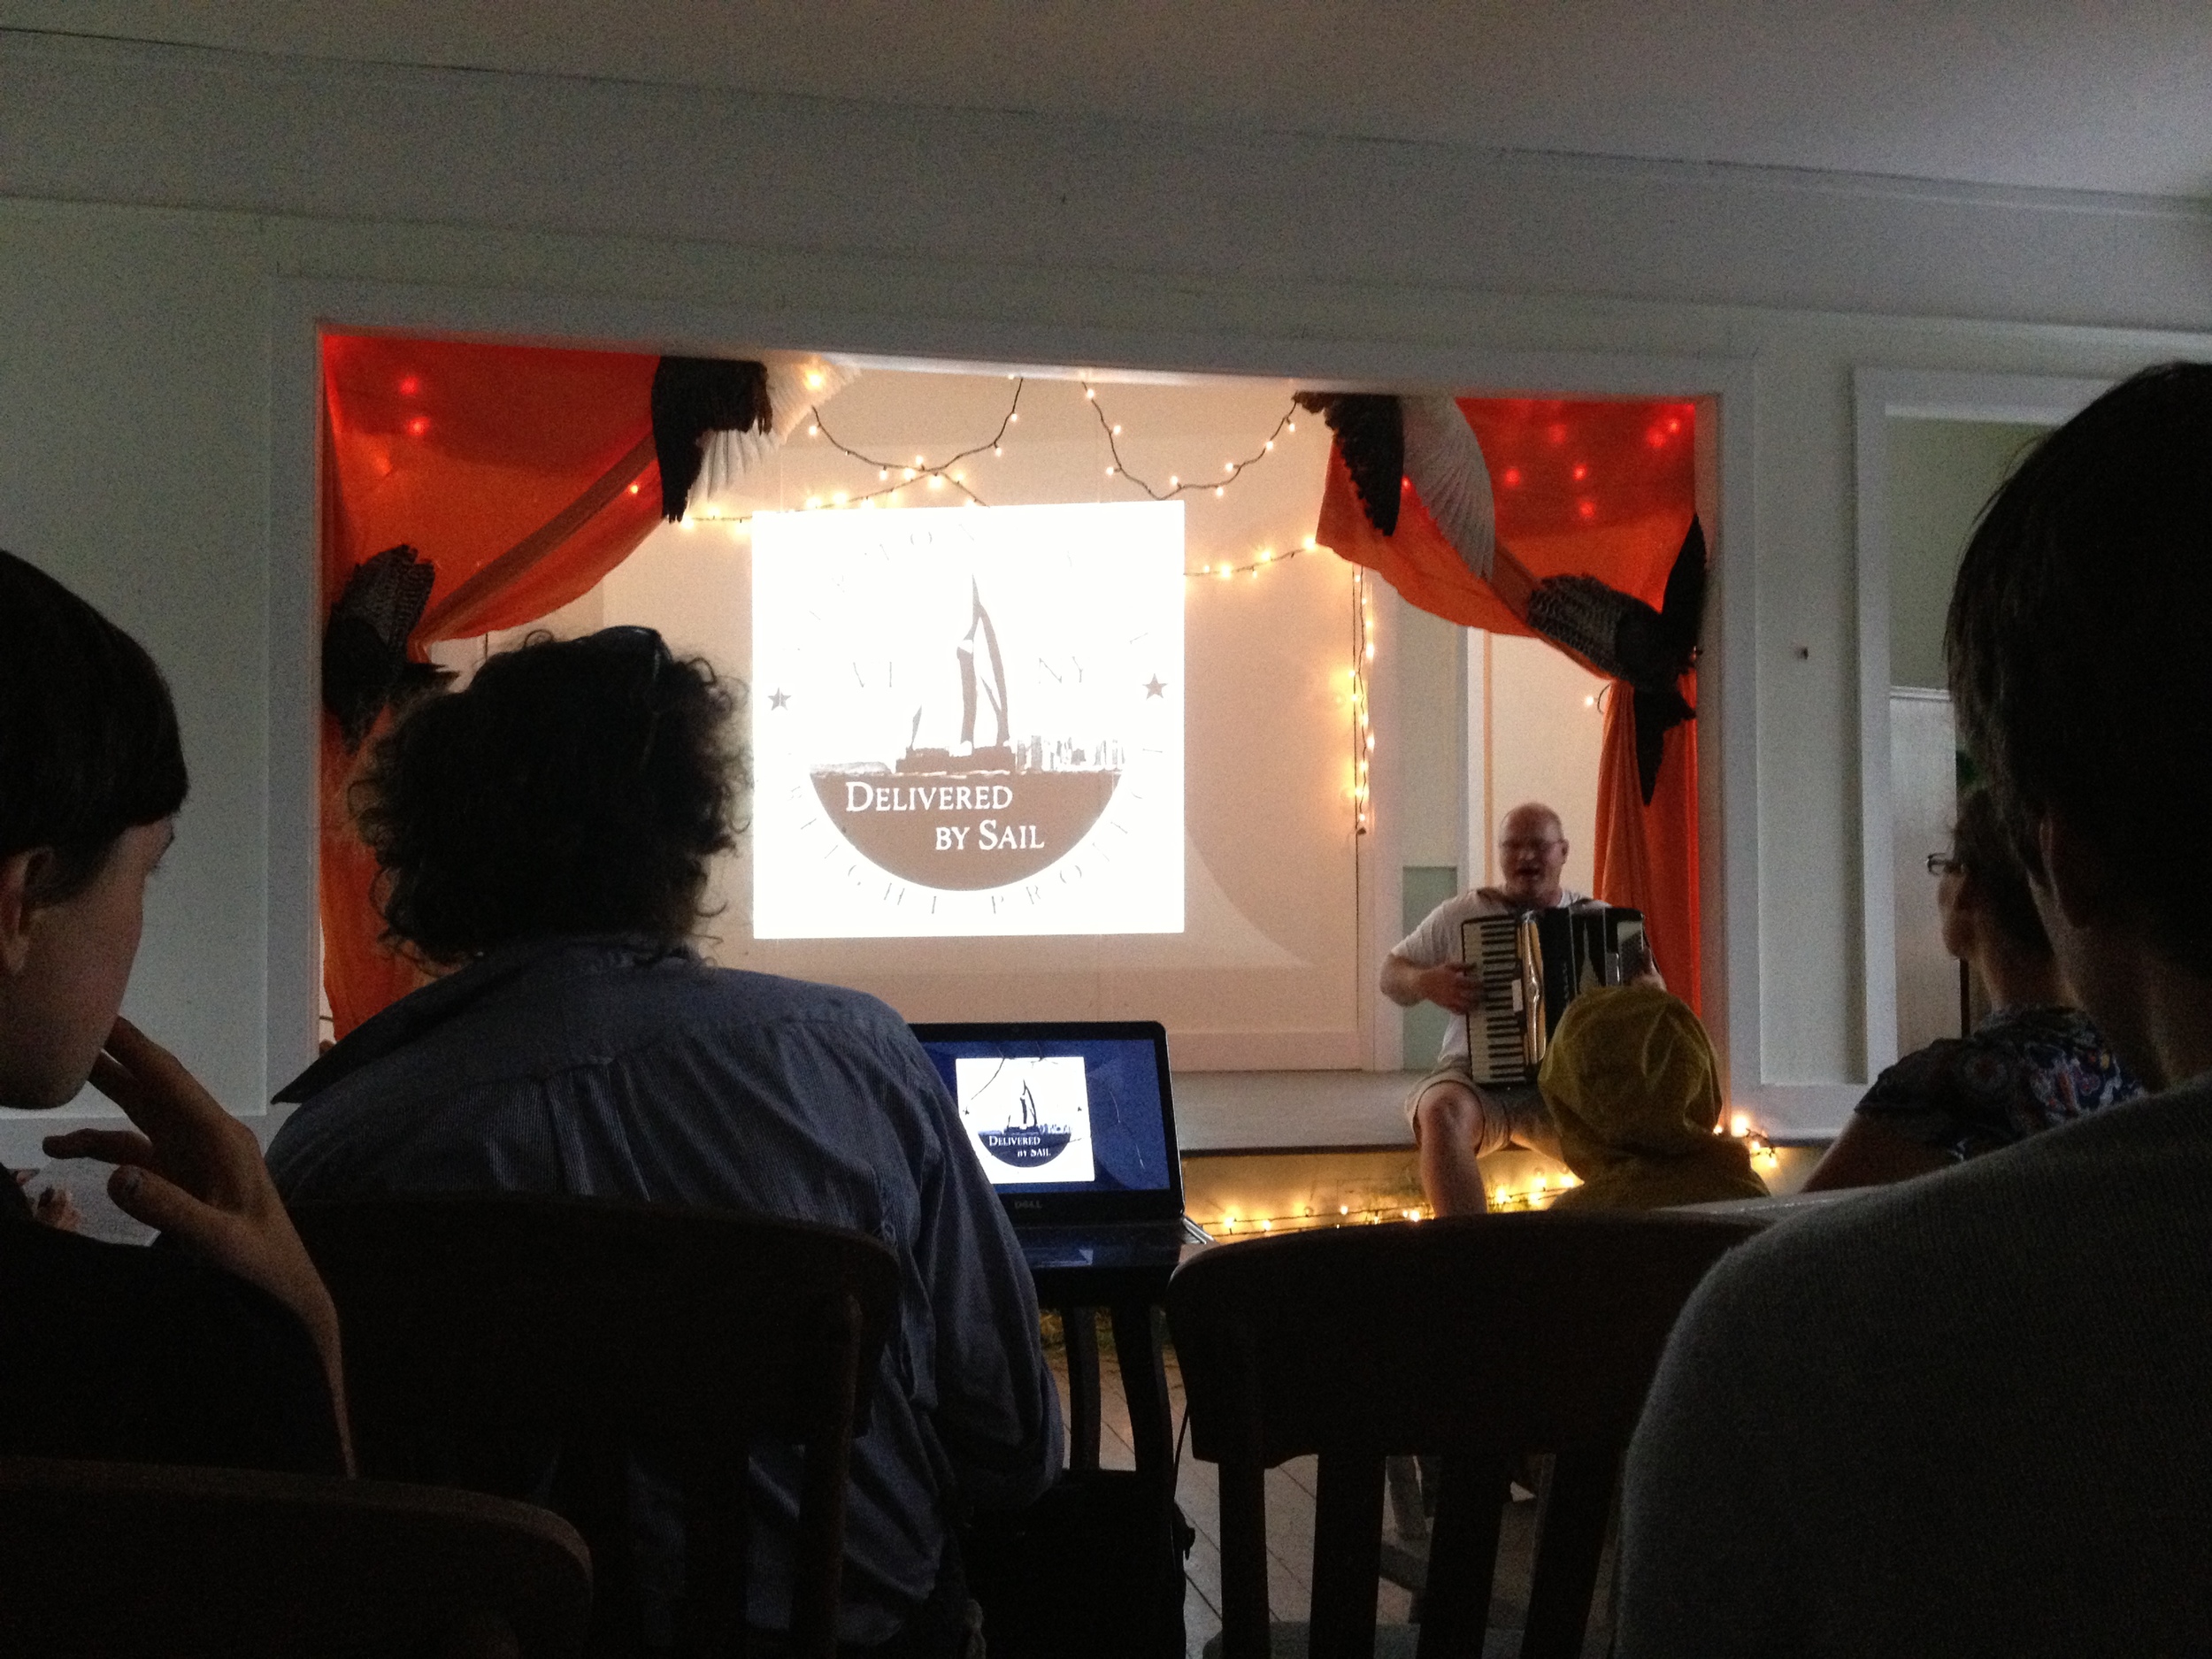  Back at the Ausable Grange, we heard a talk from Eric Andrus (seated with accordion), founder of the  Vermont Sail Freight Project . His vision is to have a fleet farmer-owned sail-powered barges moving goods from farms up around Lake Champlain down